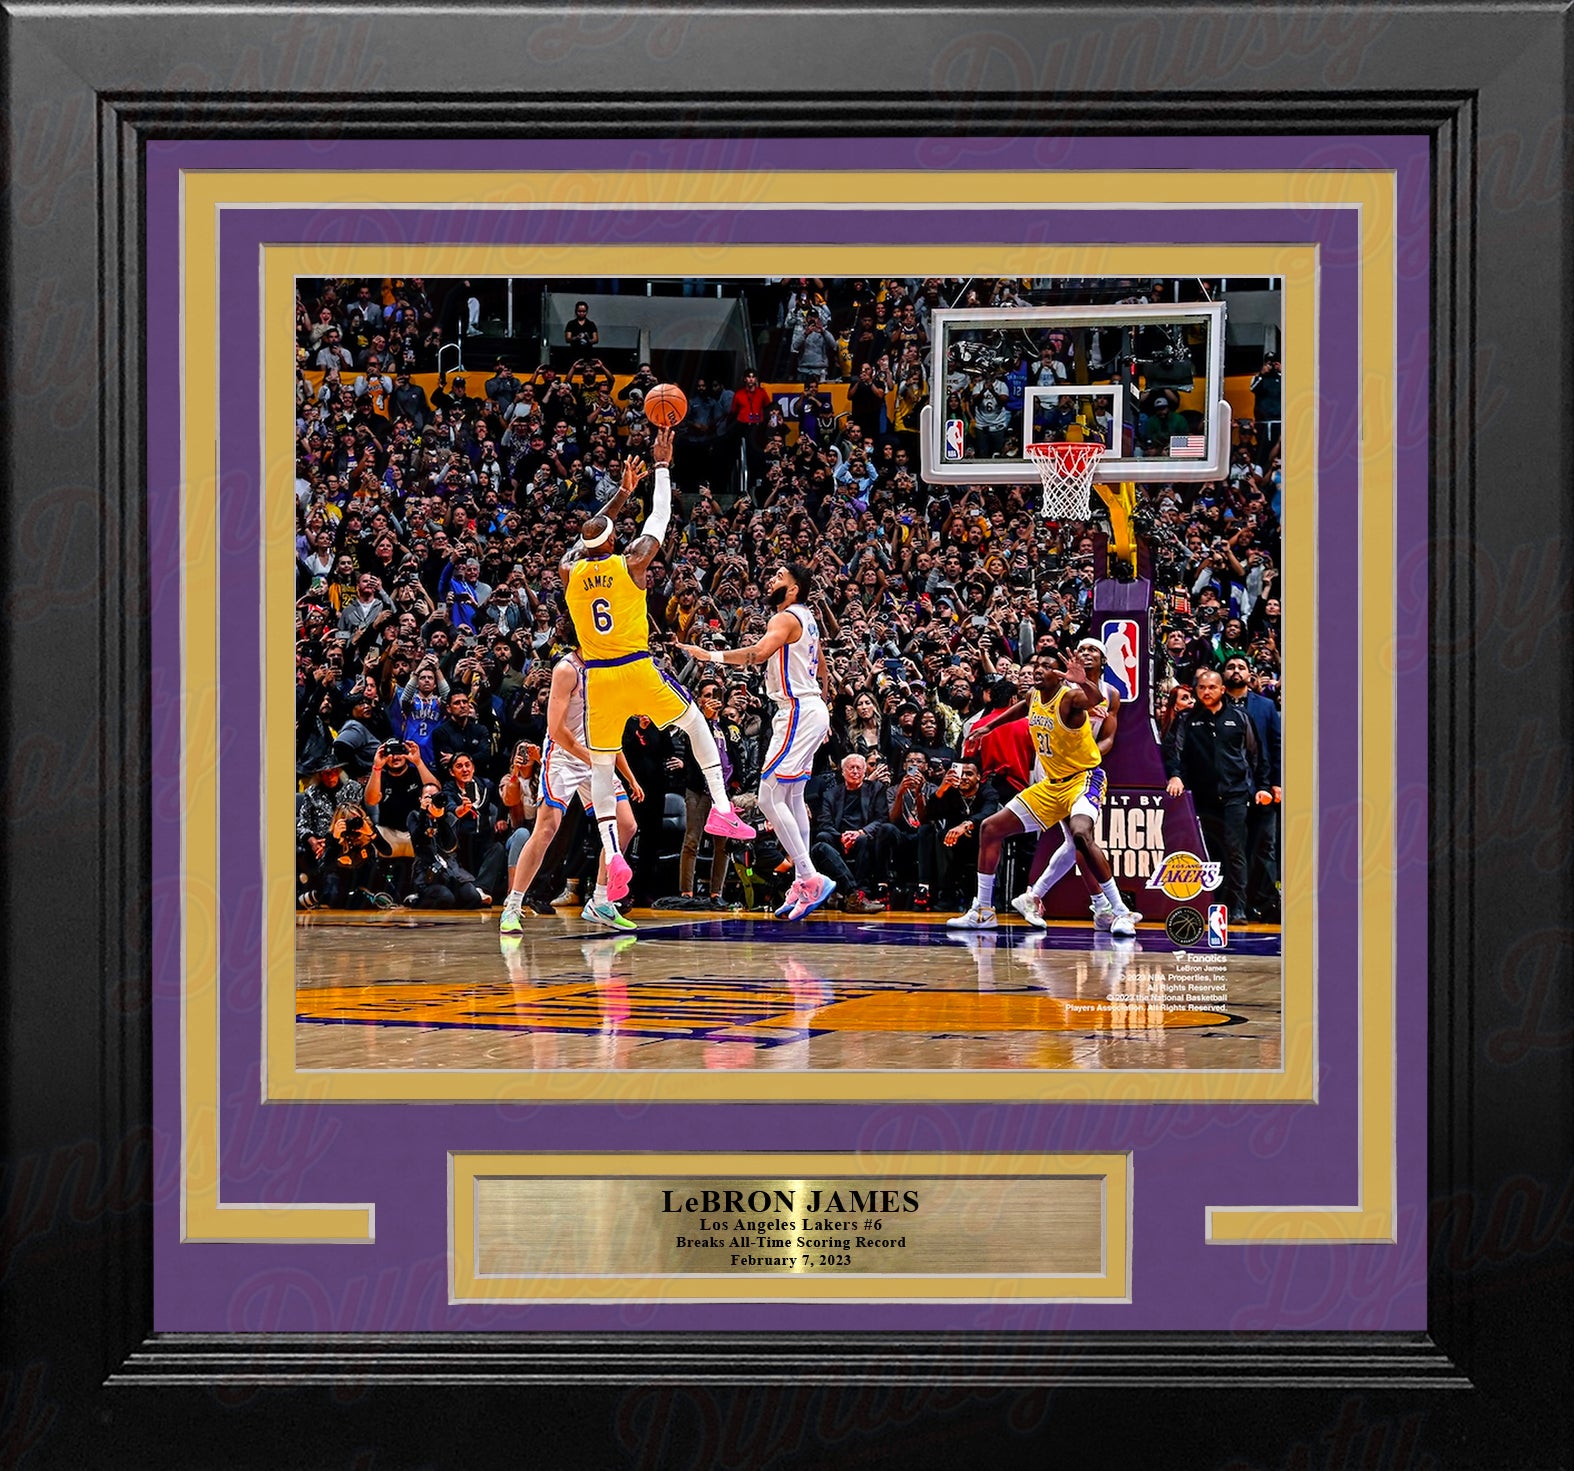 LeBron James Breaks the All-Time Scoring Record Los Angeles Lakers 8" x 10" Framed Basketball Photo - Dynasty Sports & Framing 